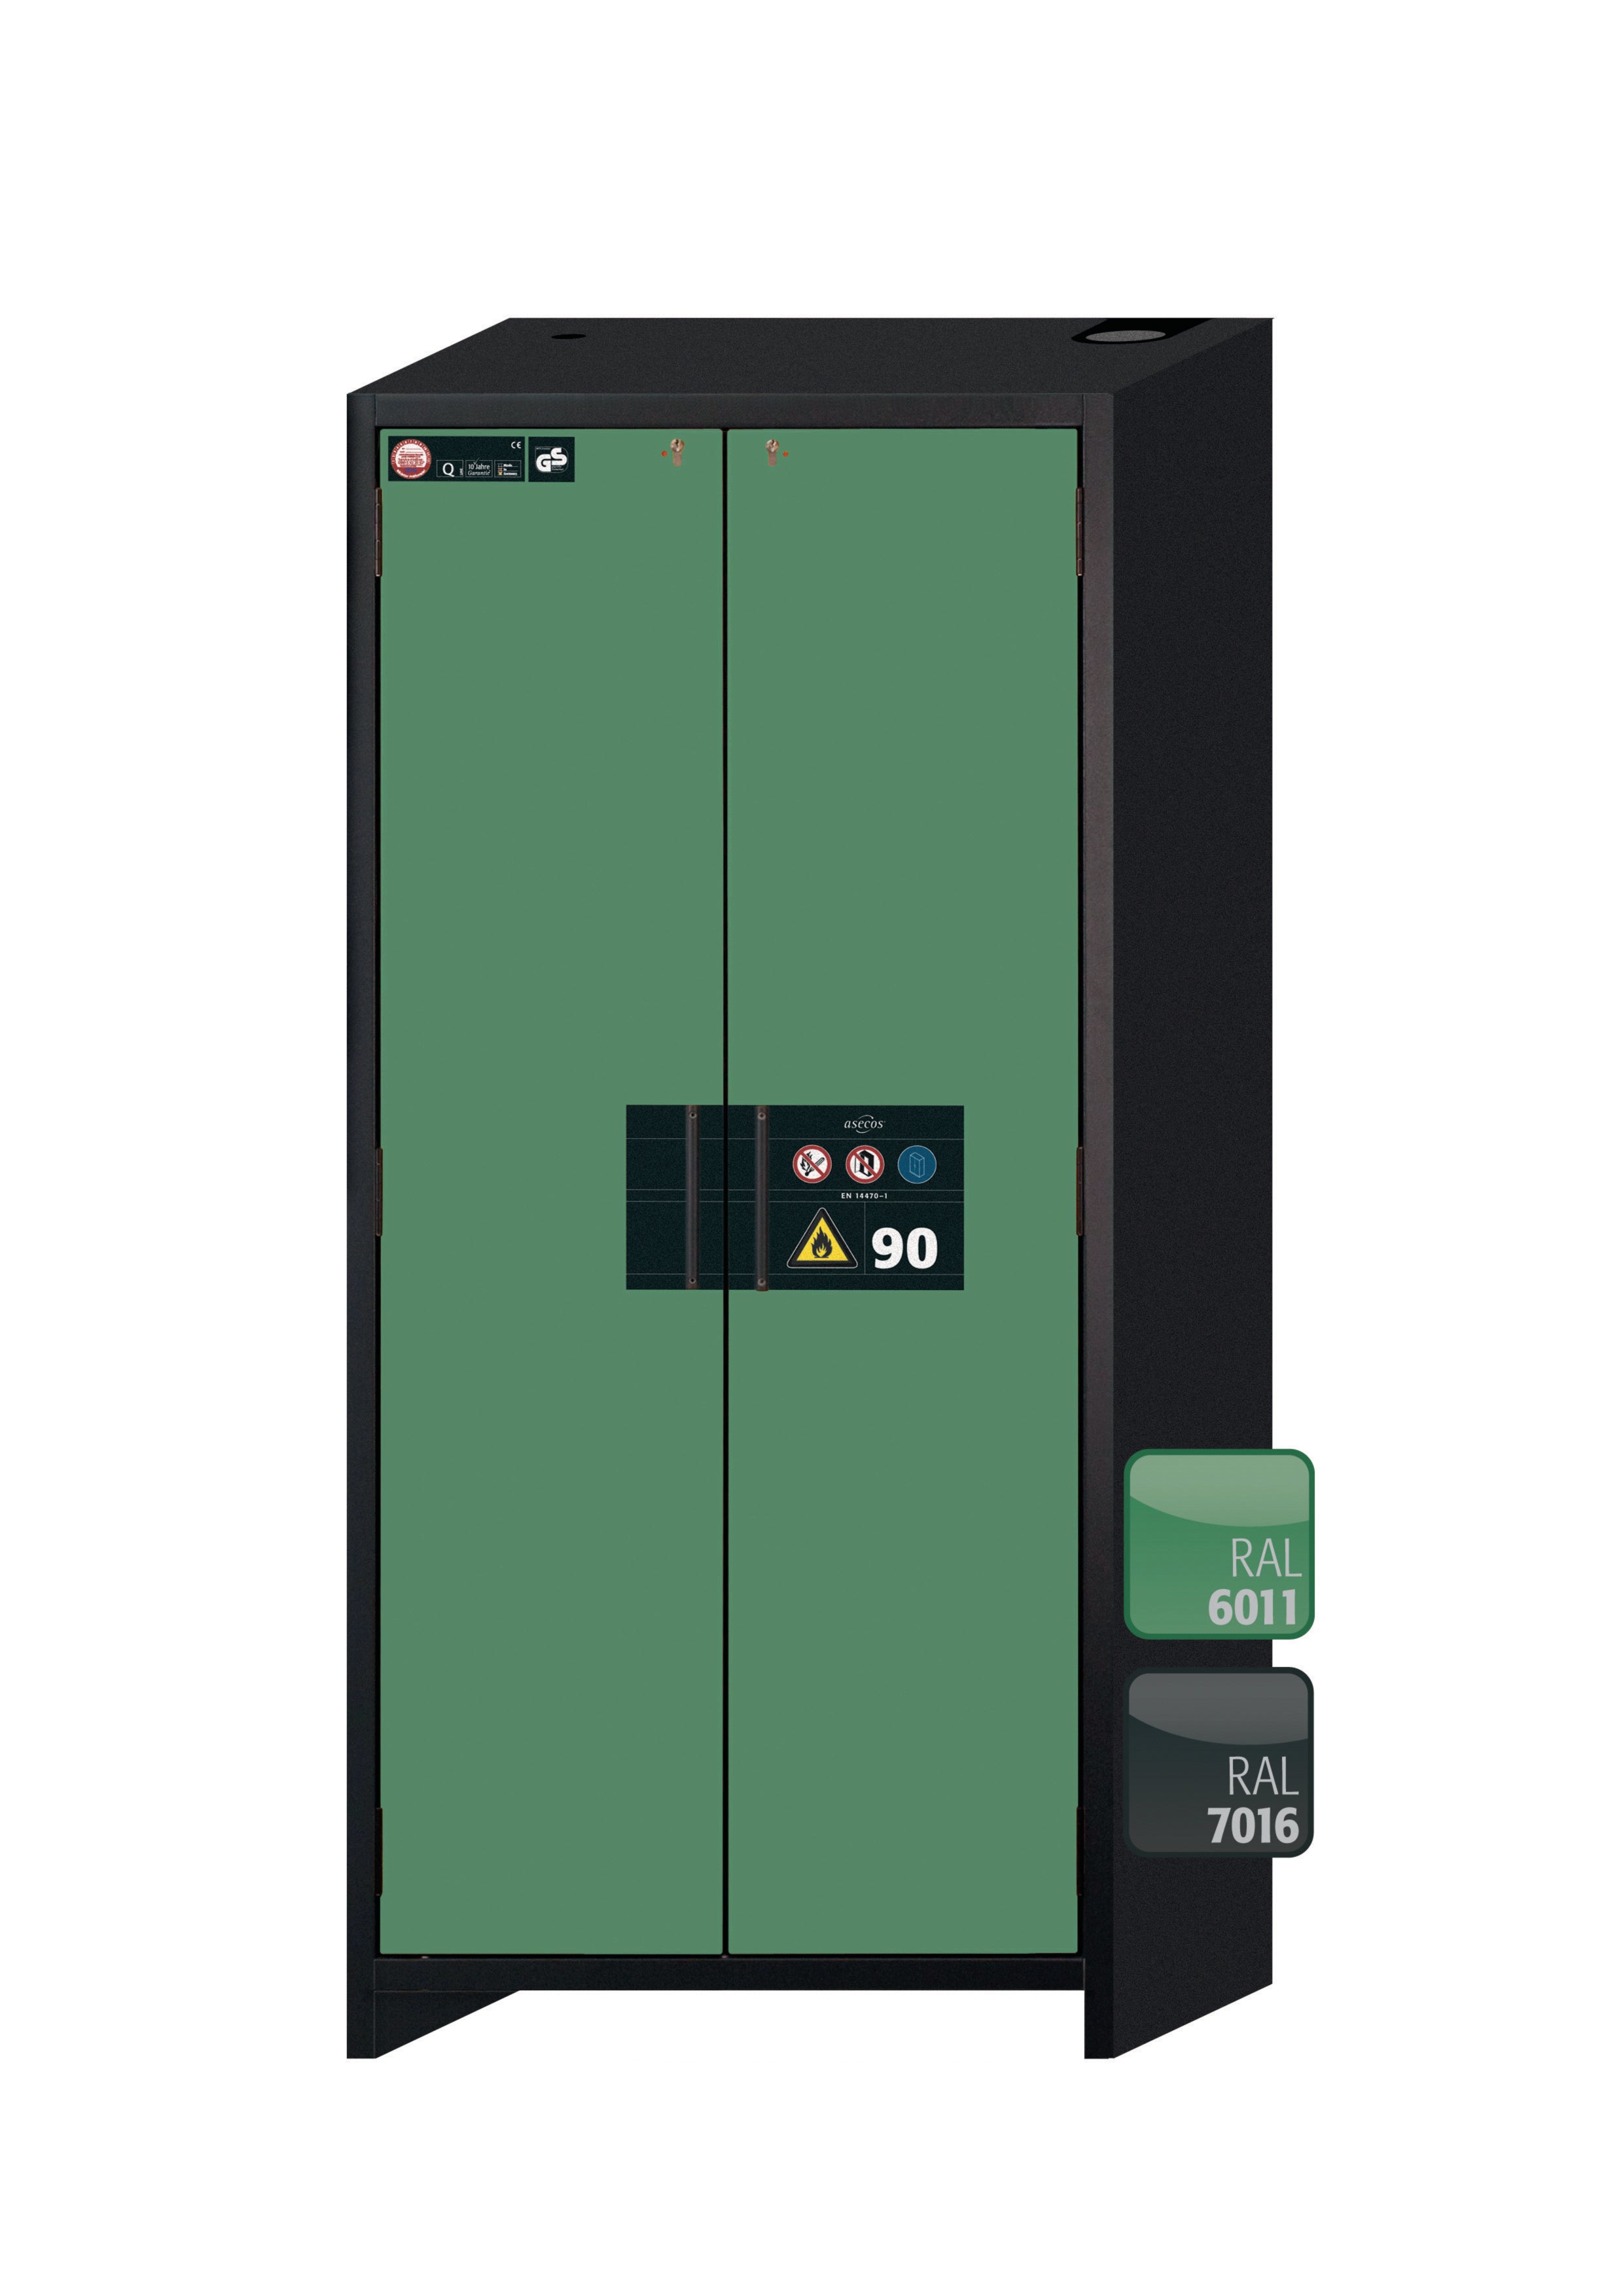 Type 90 safety storage cabinet Q-CLASSIC-90 model Q90.195.090 in reseda green RAL 6011 with 4x drawer (standard) (stainless steel 1.4301),